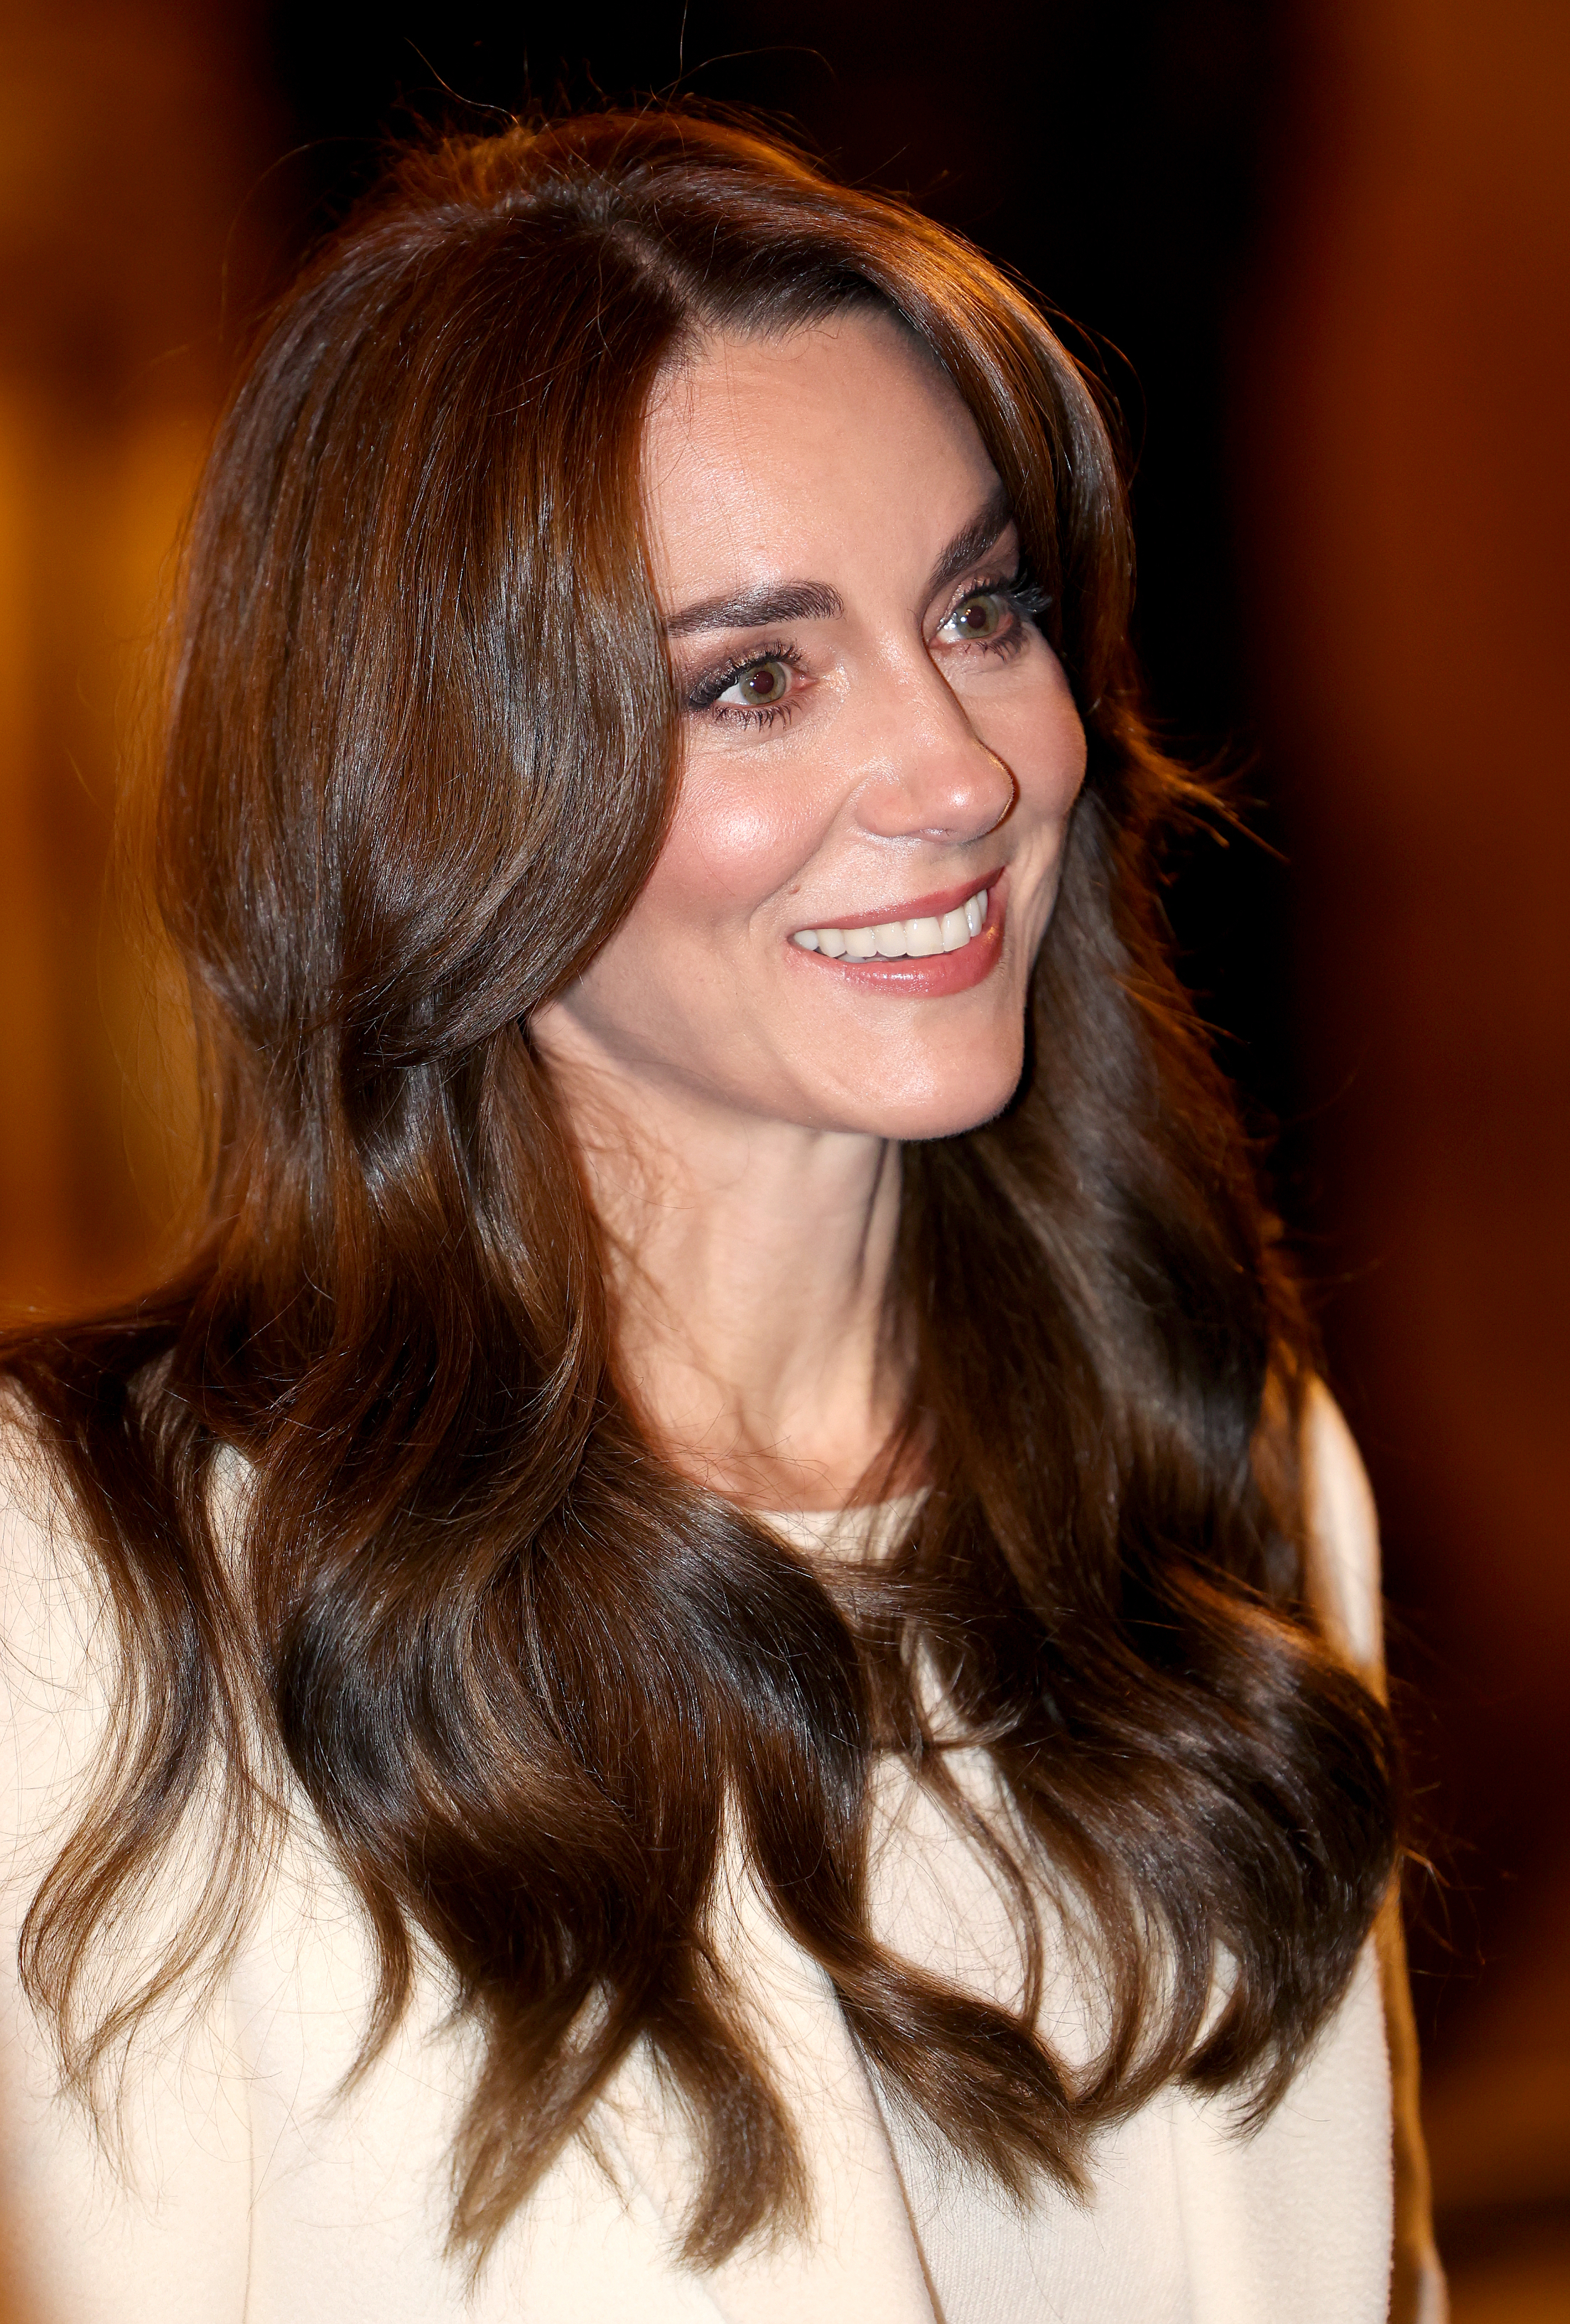 Woman with wavy hair smiling, wearing a V-neck outfit